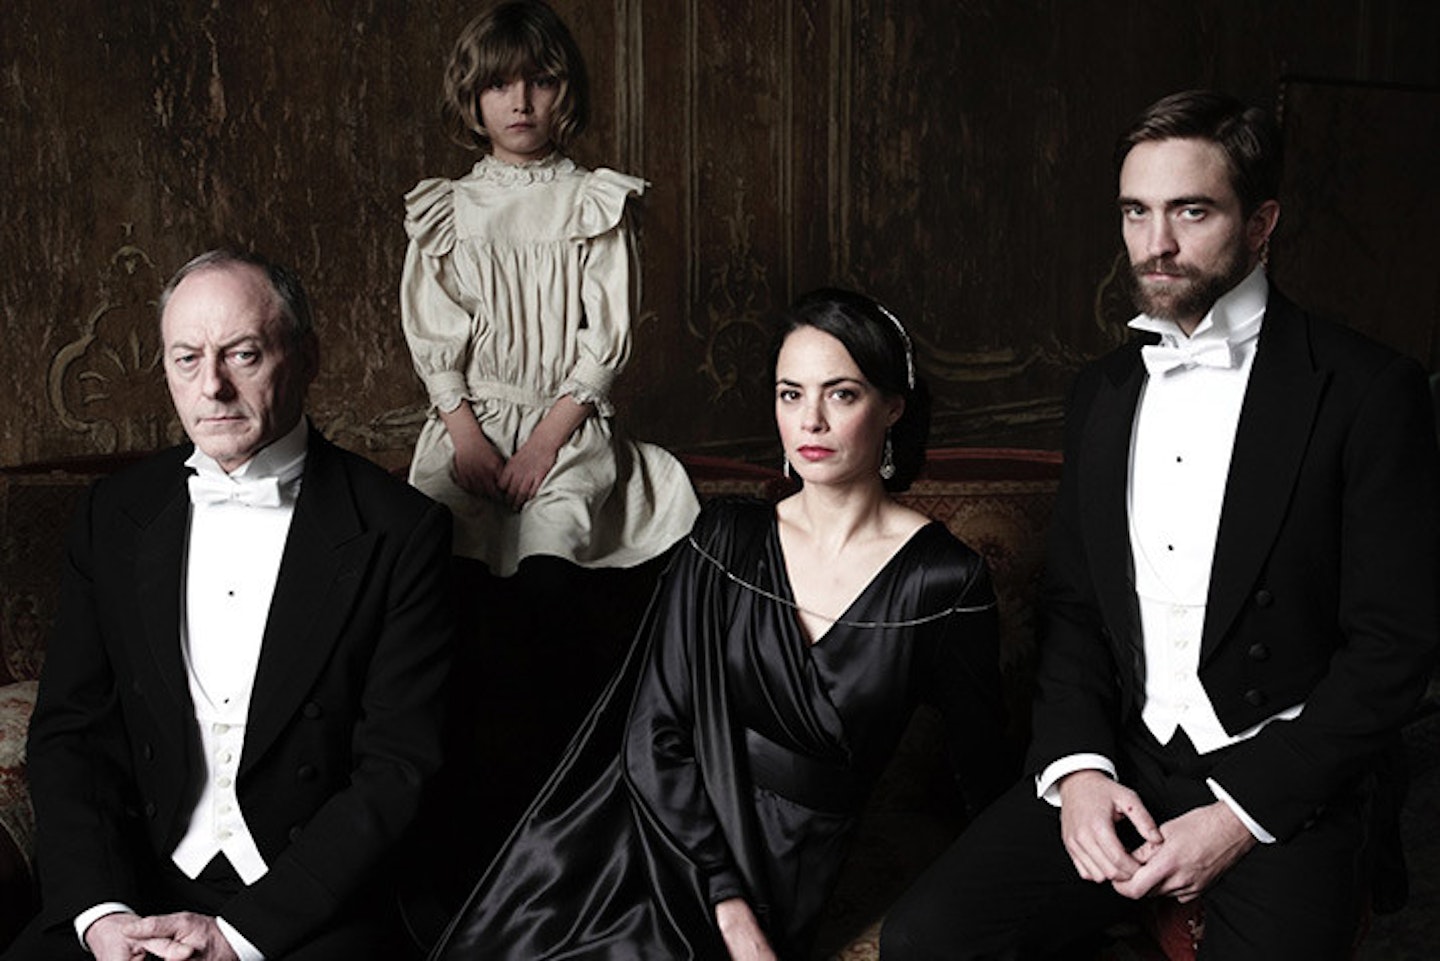 The cast of Childhood Of A Leader